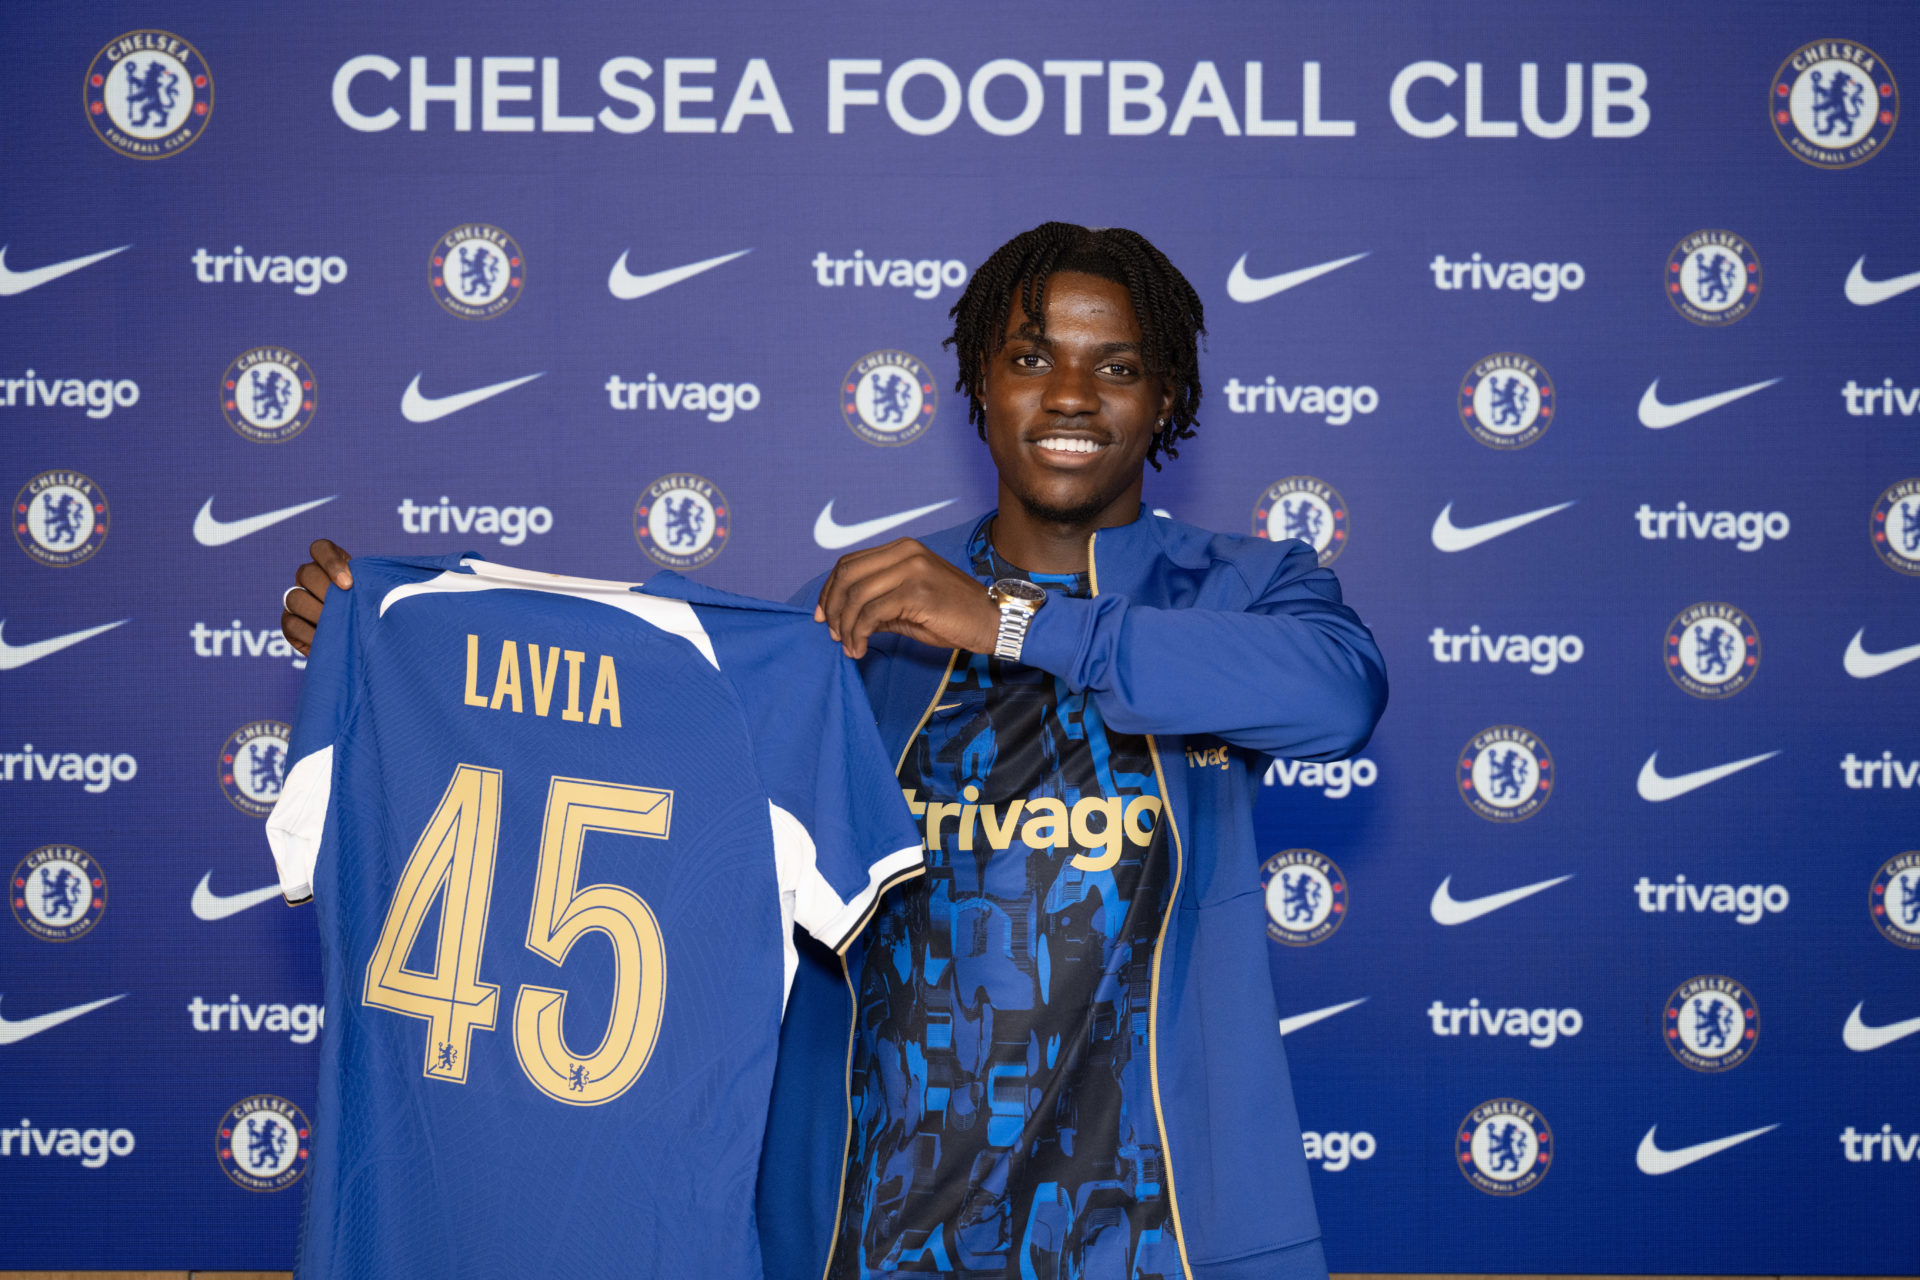 Chelsea are now willing to spend £30m on rare striker, he shares the same agent as Romeo Lavia